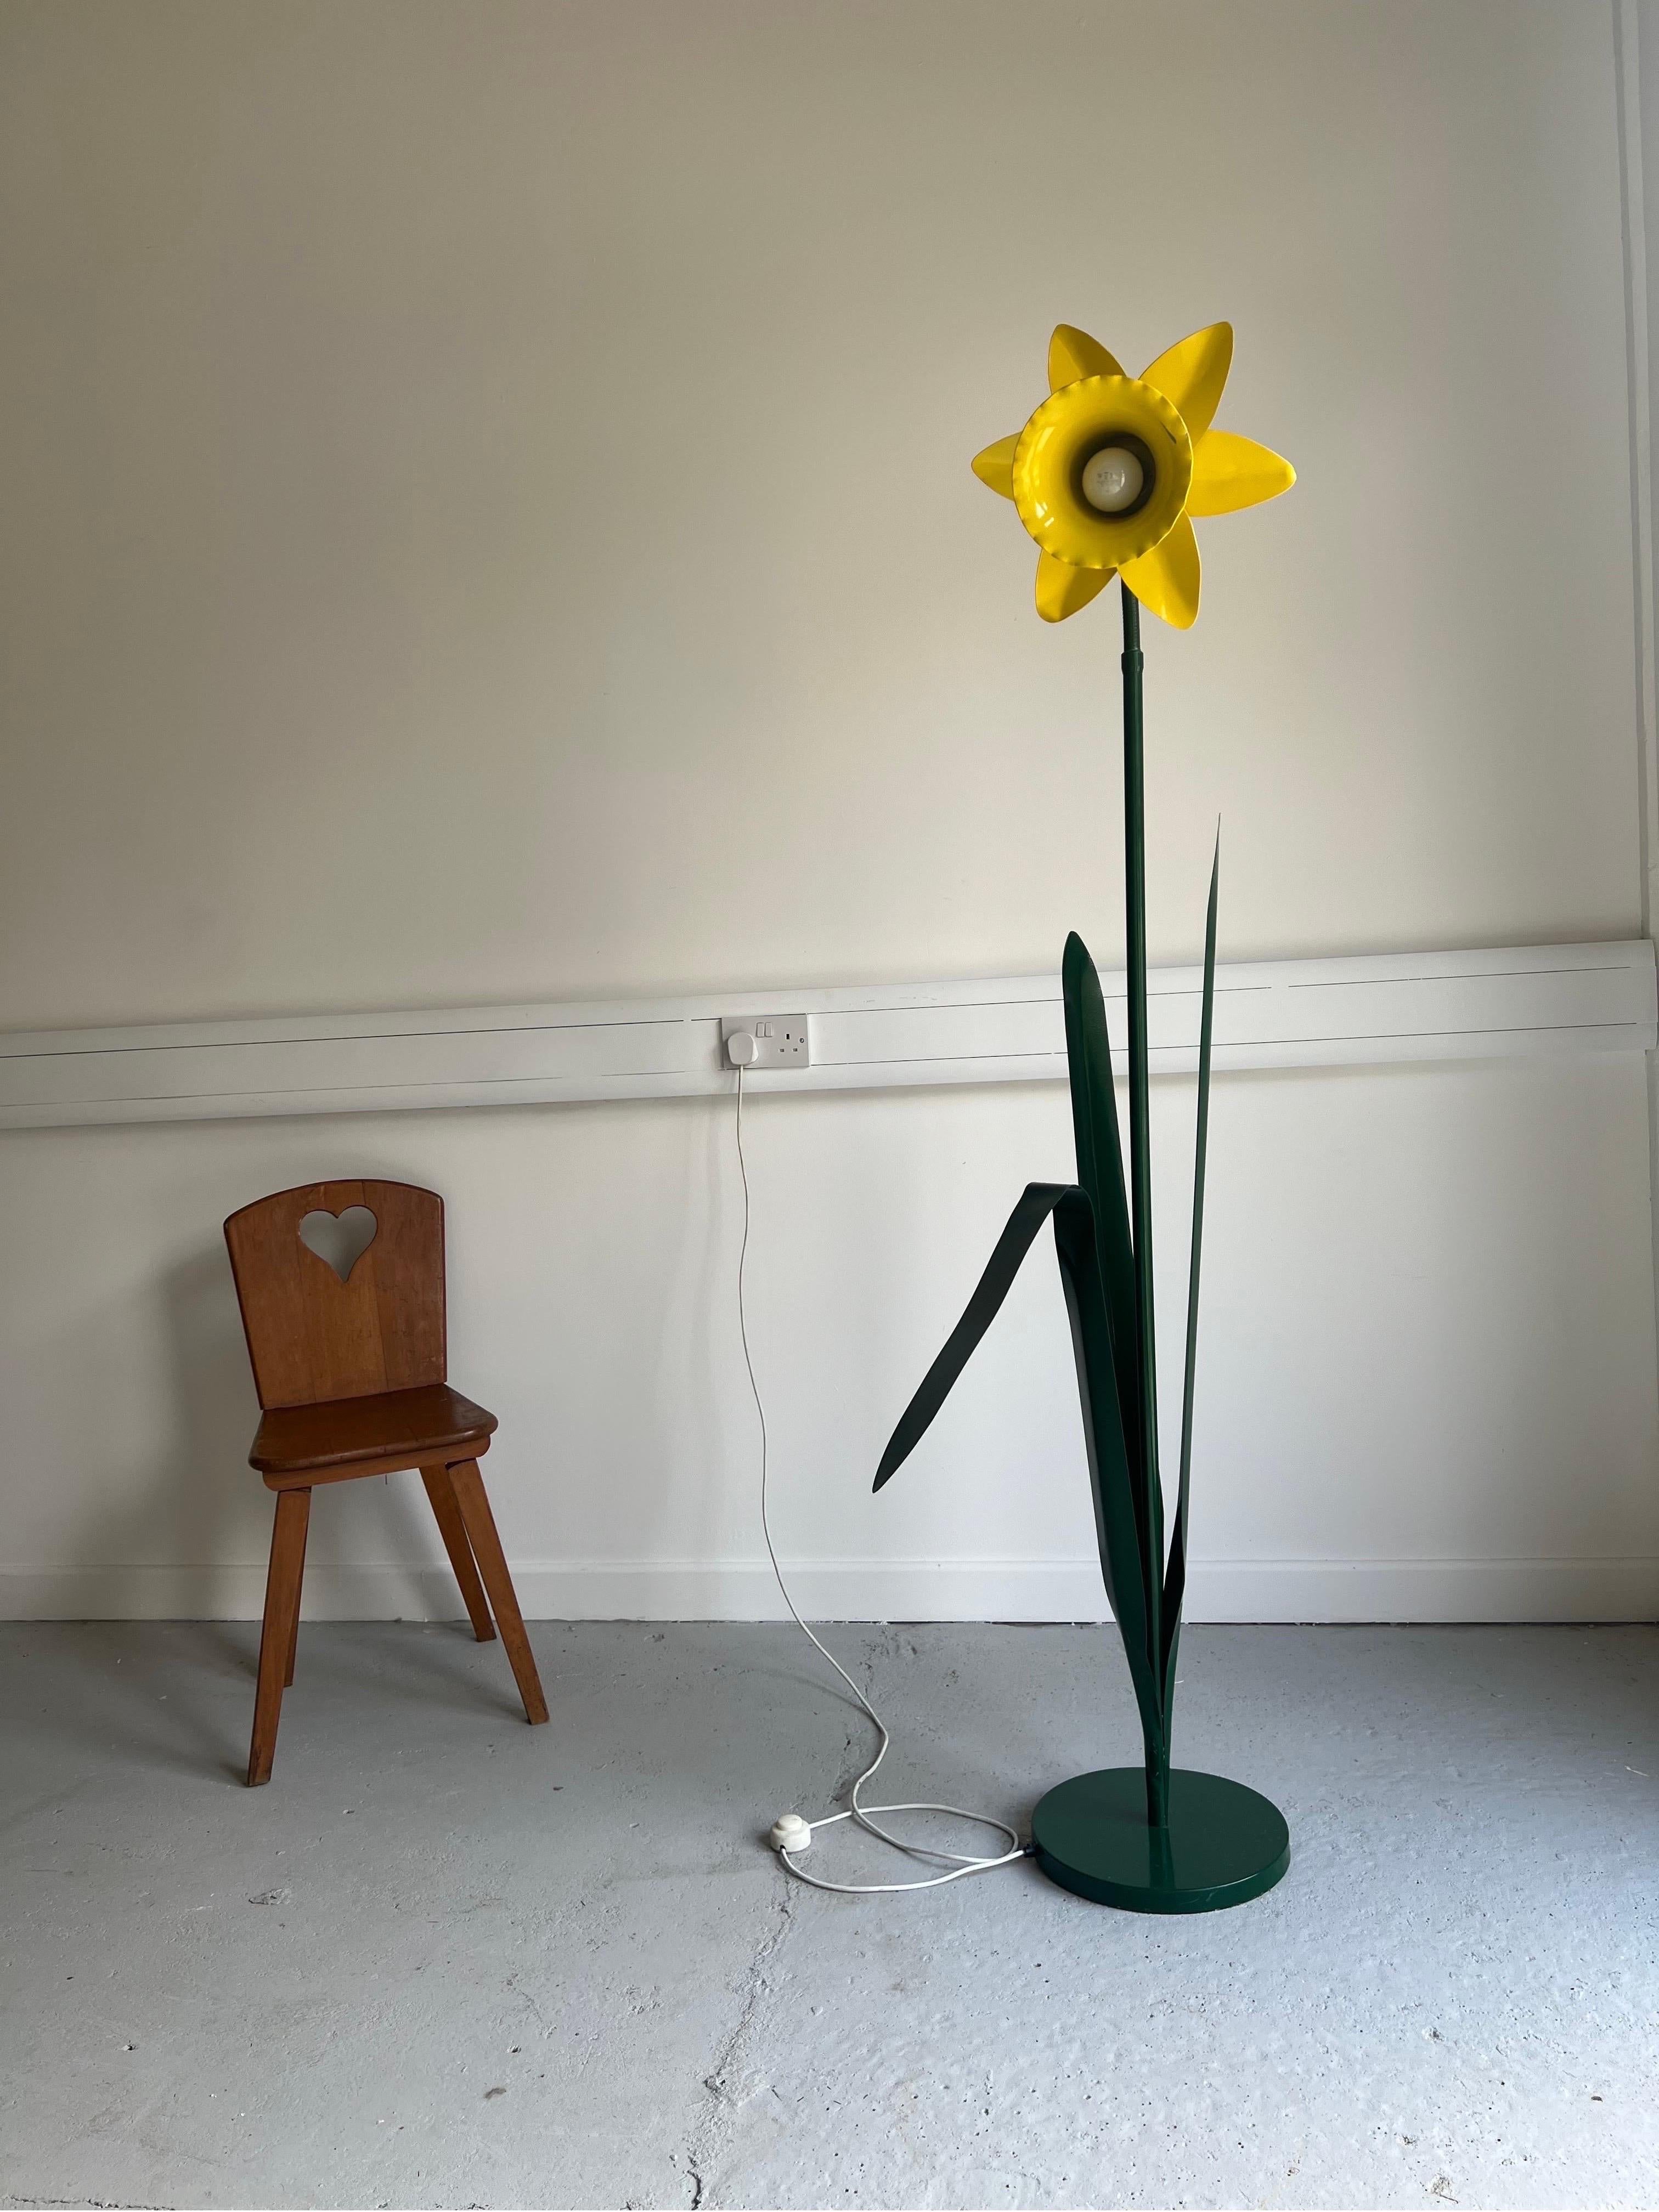 Peter Bliss Original Yellow Metal Daffodil Floor Lamp from 1986.  

Large, iconic and super rare bright yellow daffodil floor lamp made by Bliss. The neck is adjustable.  

In fair condition, there is some age related wear, a small paint chip on the